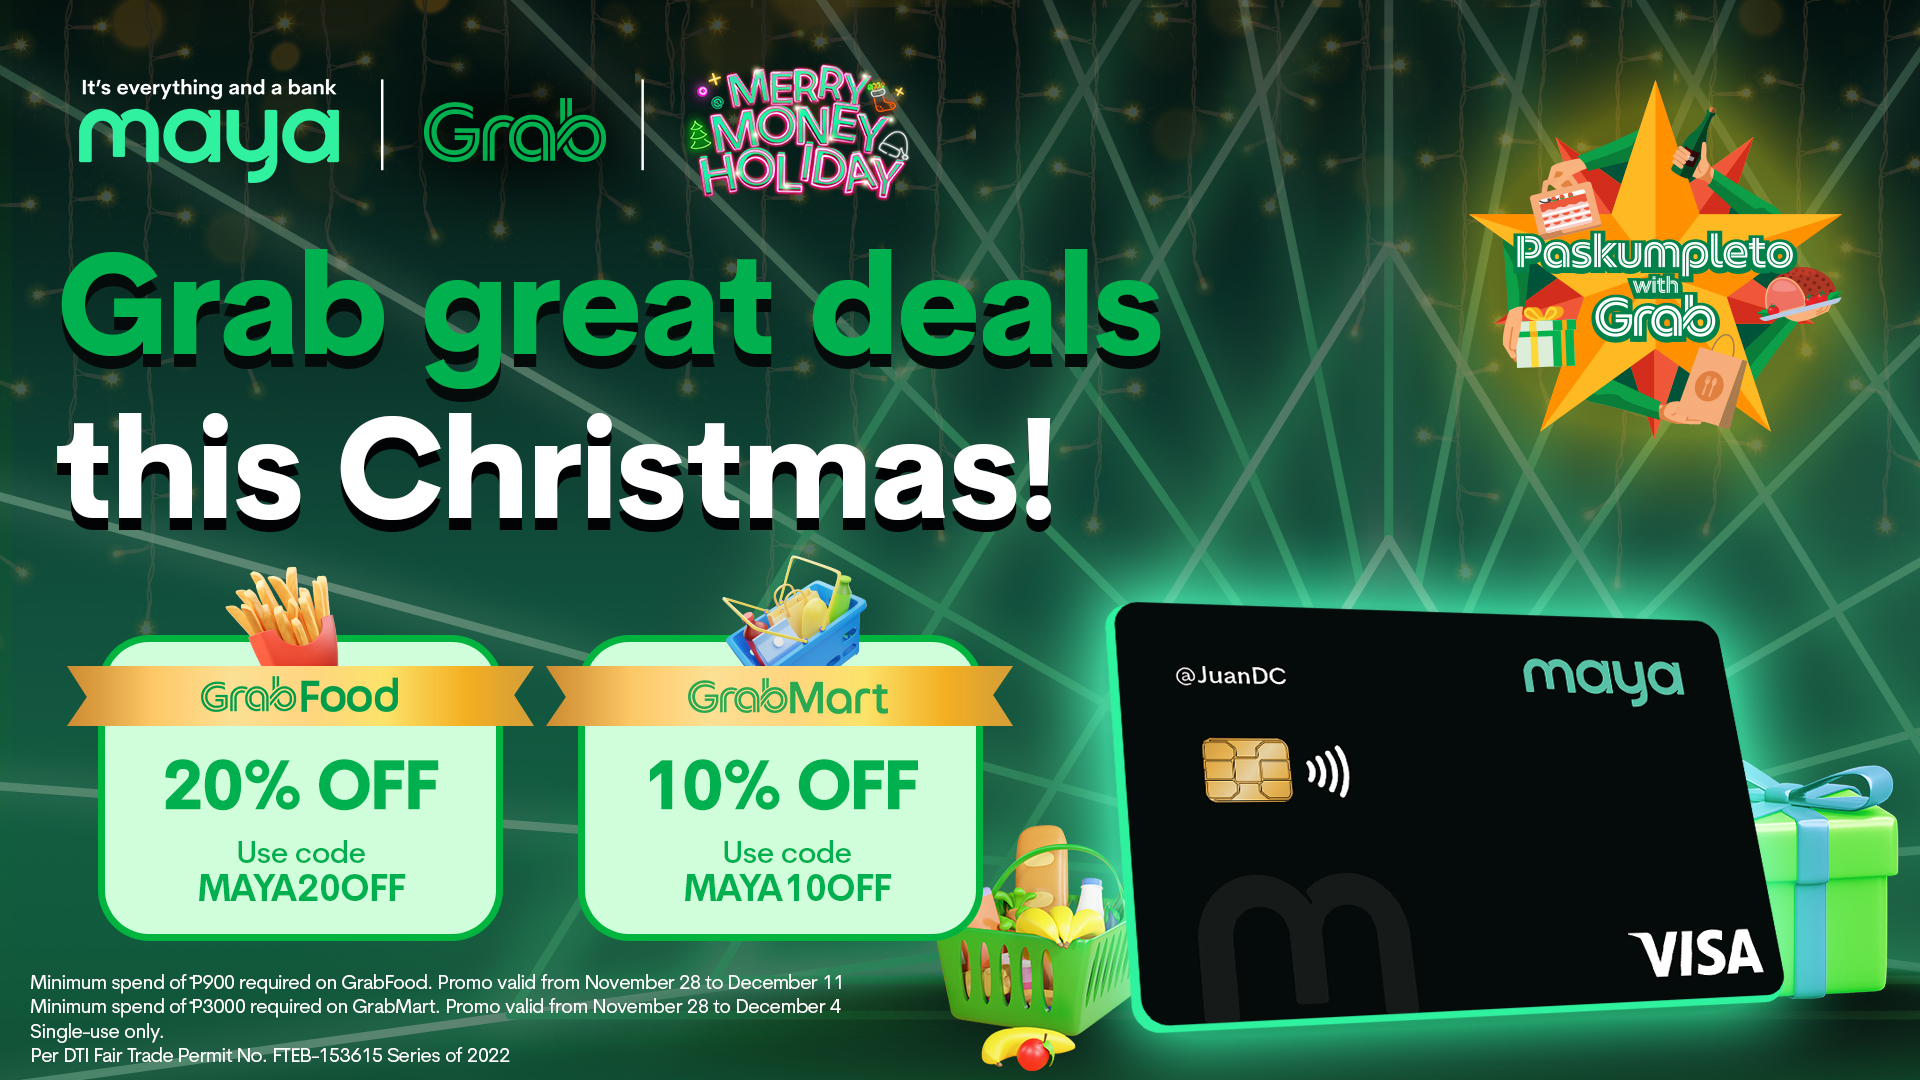 Get up to 20% OFF in Grab this holiday season with your Maya card!